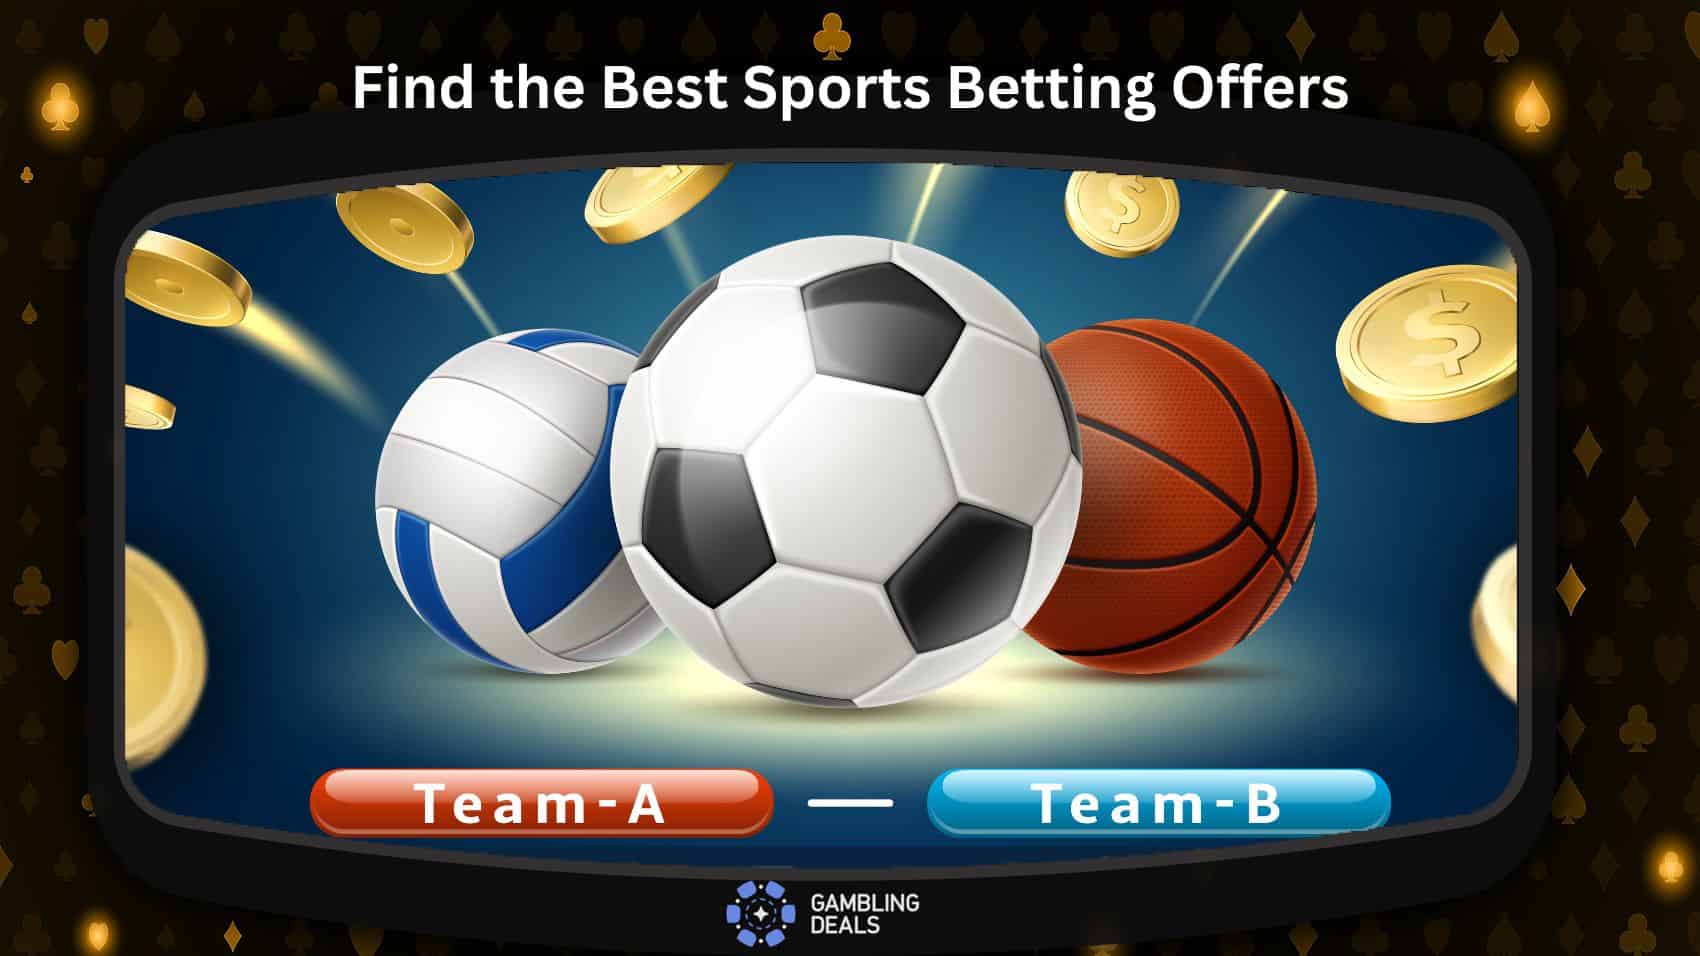 Find the Best Sports Betting Offers